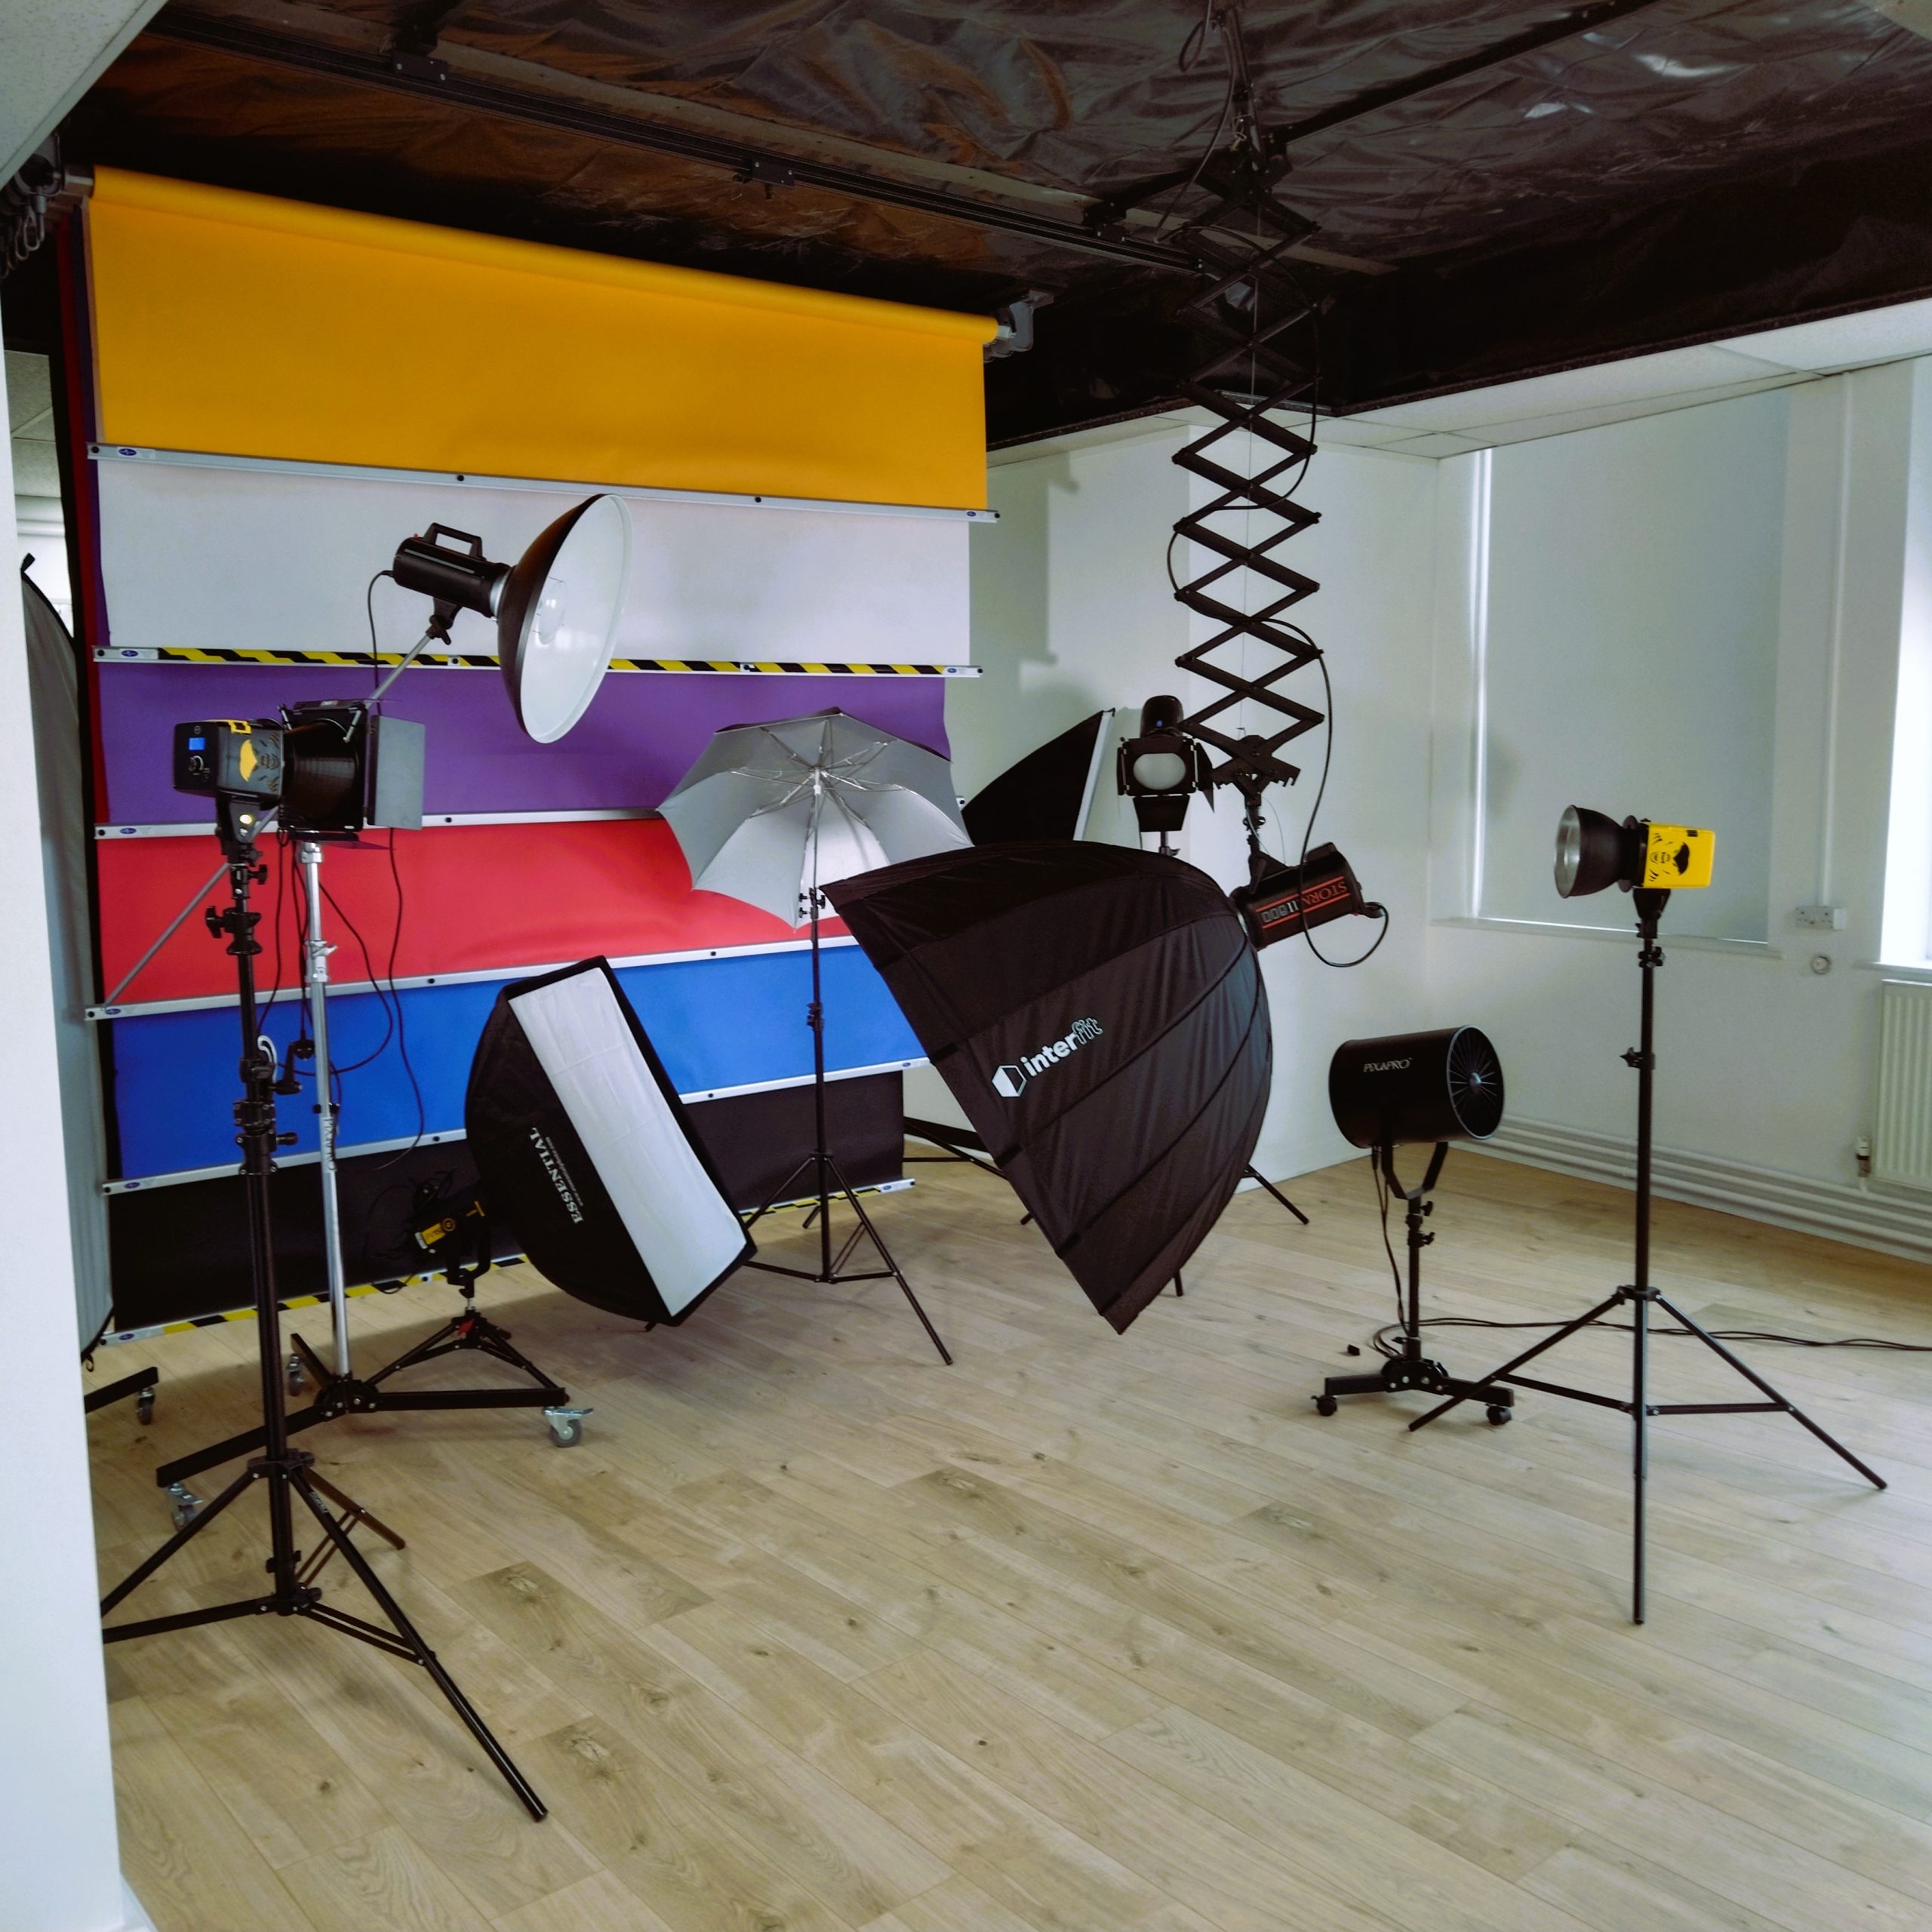 Studio hire space with variety of backdrops and lighting equipment